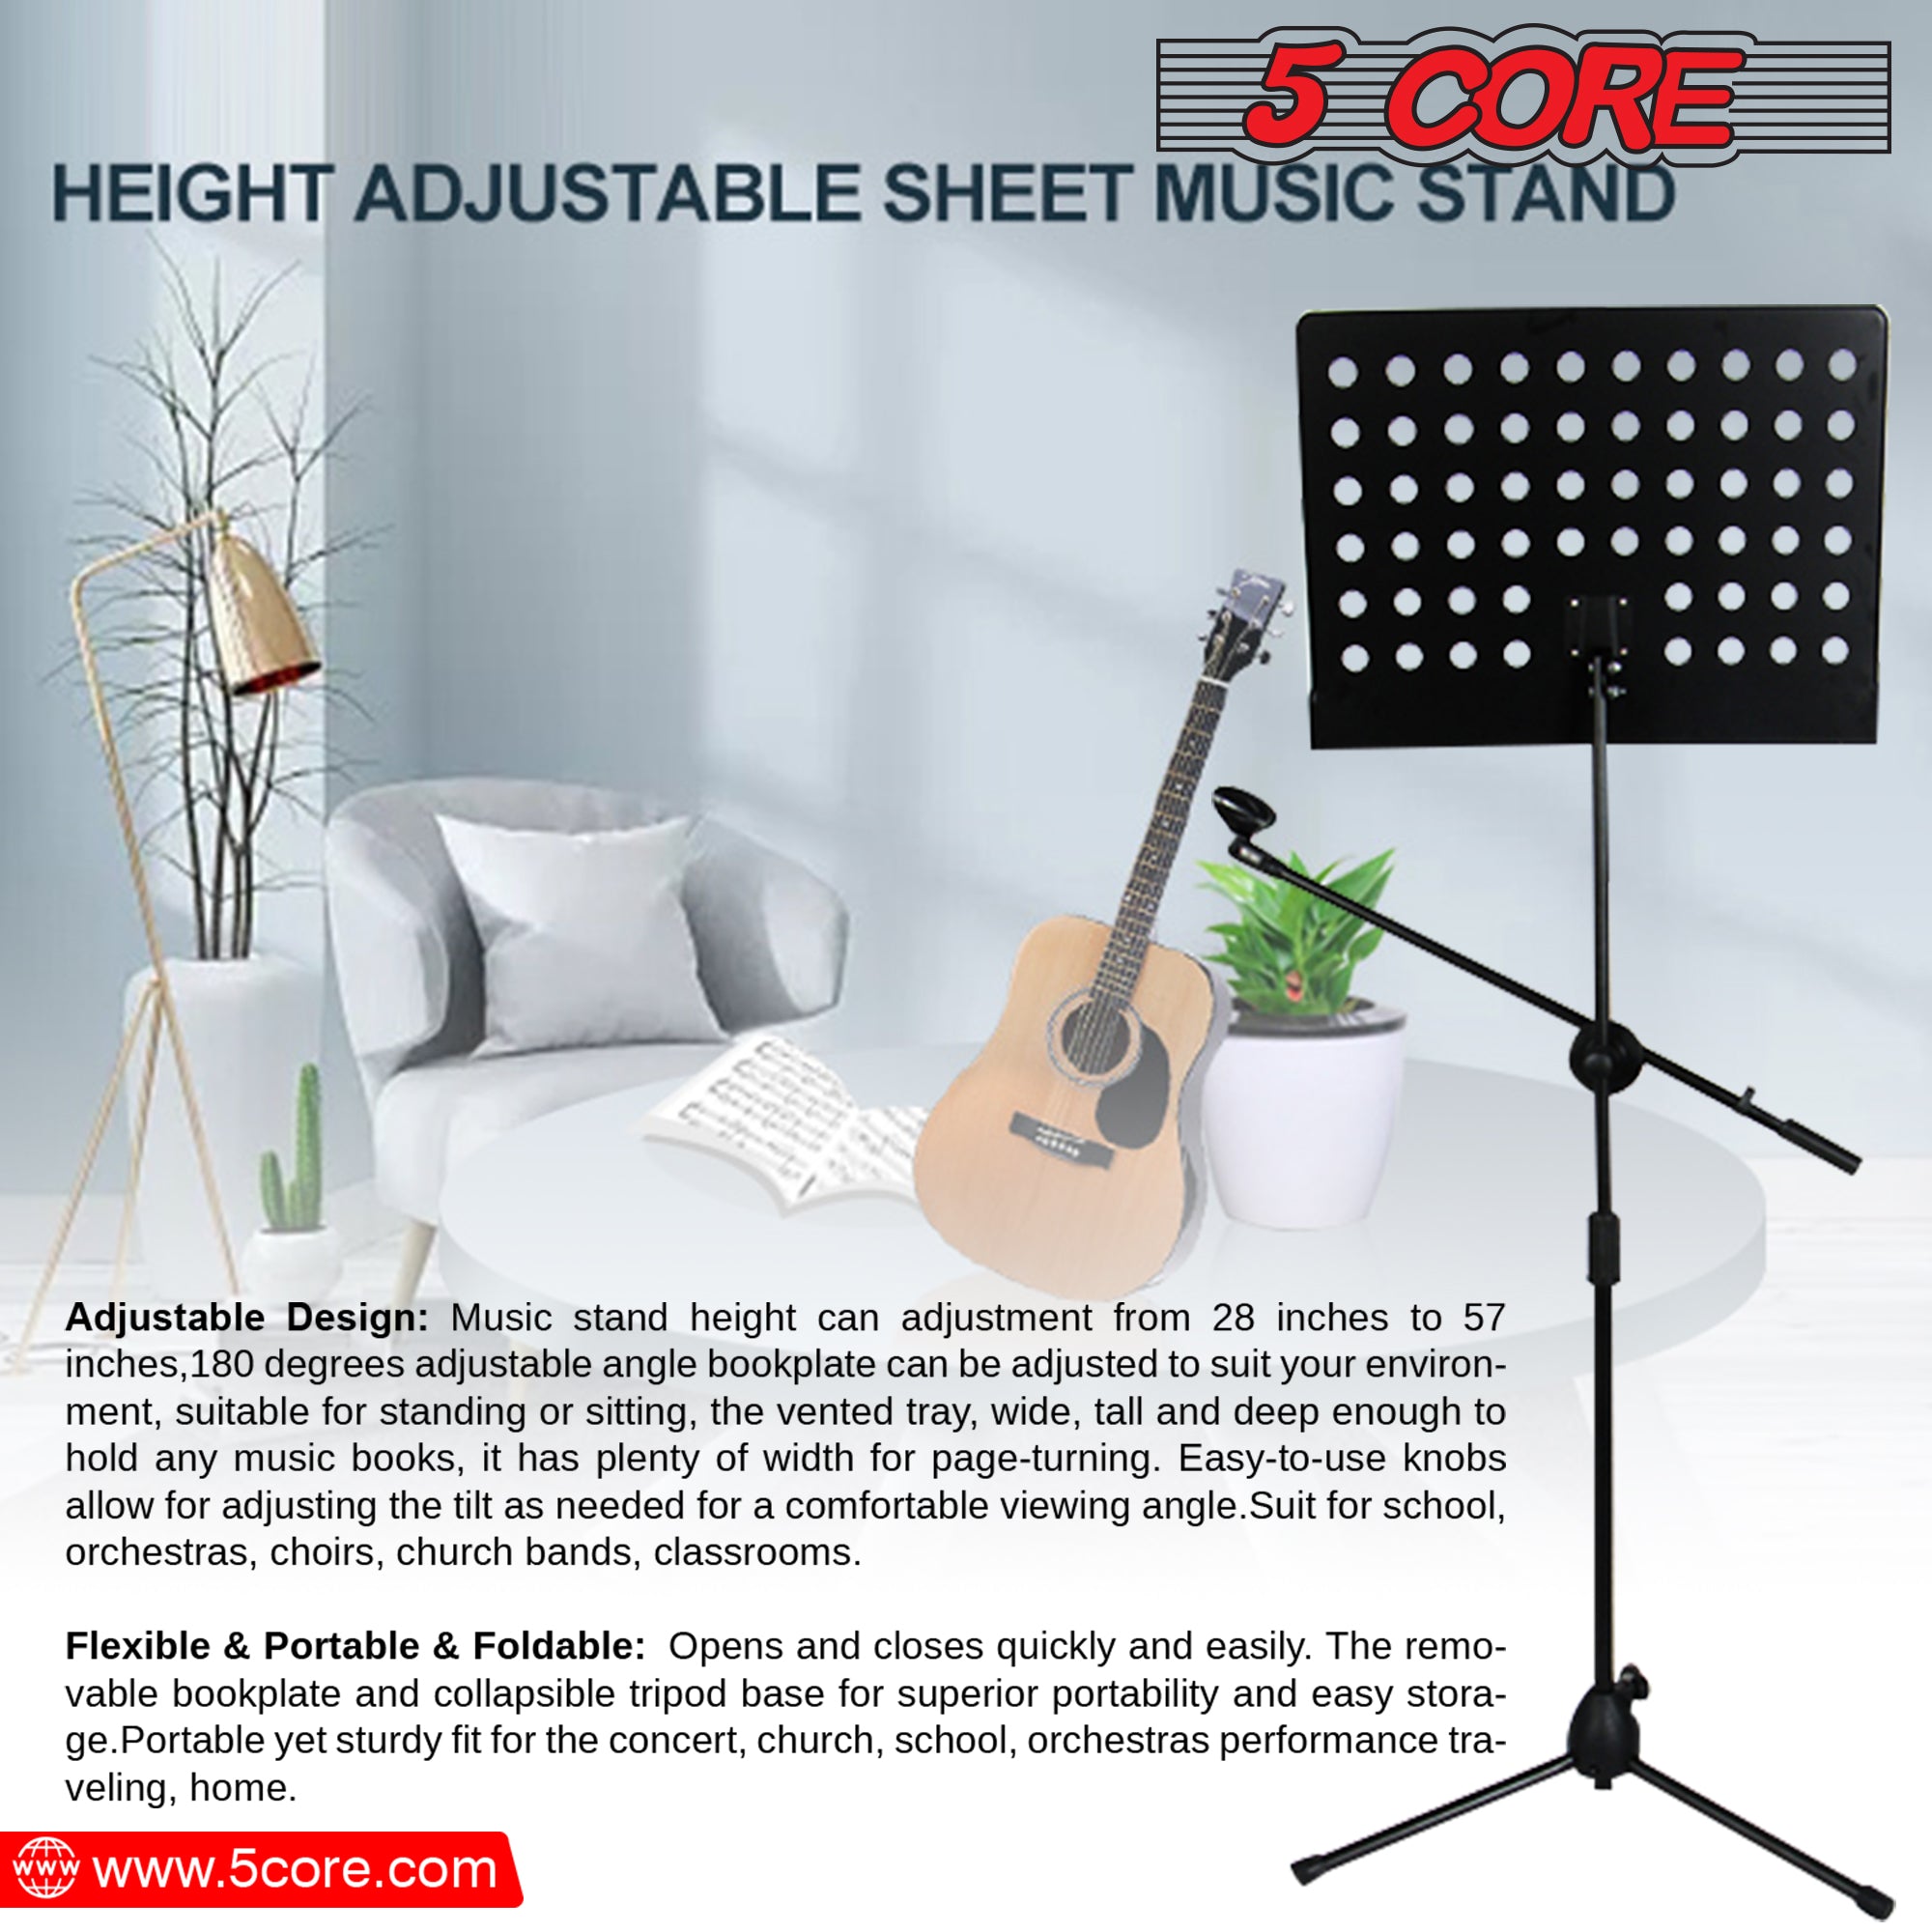 height adjustable sheet music stand